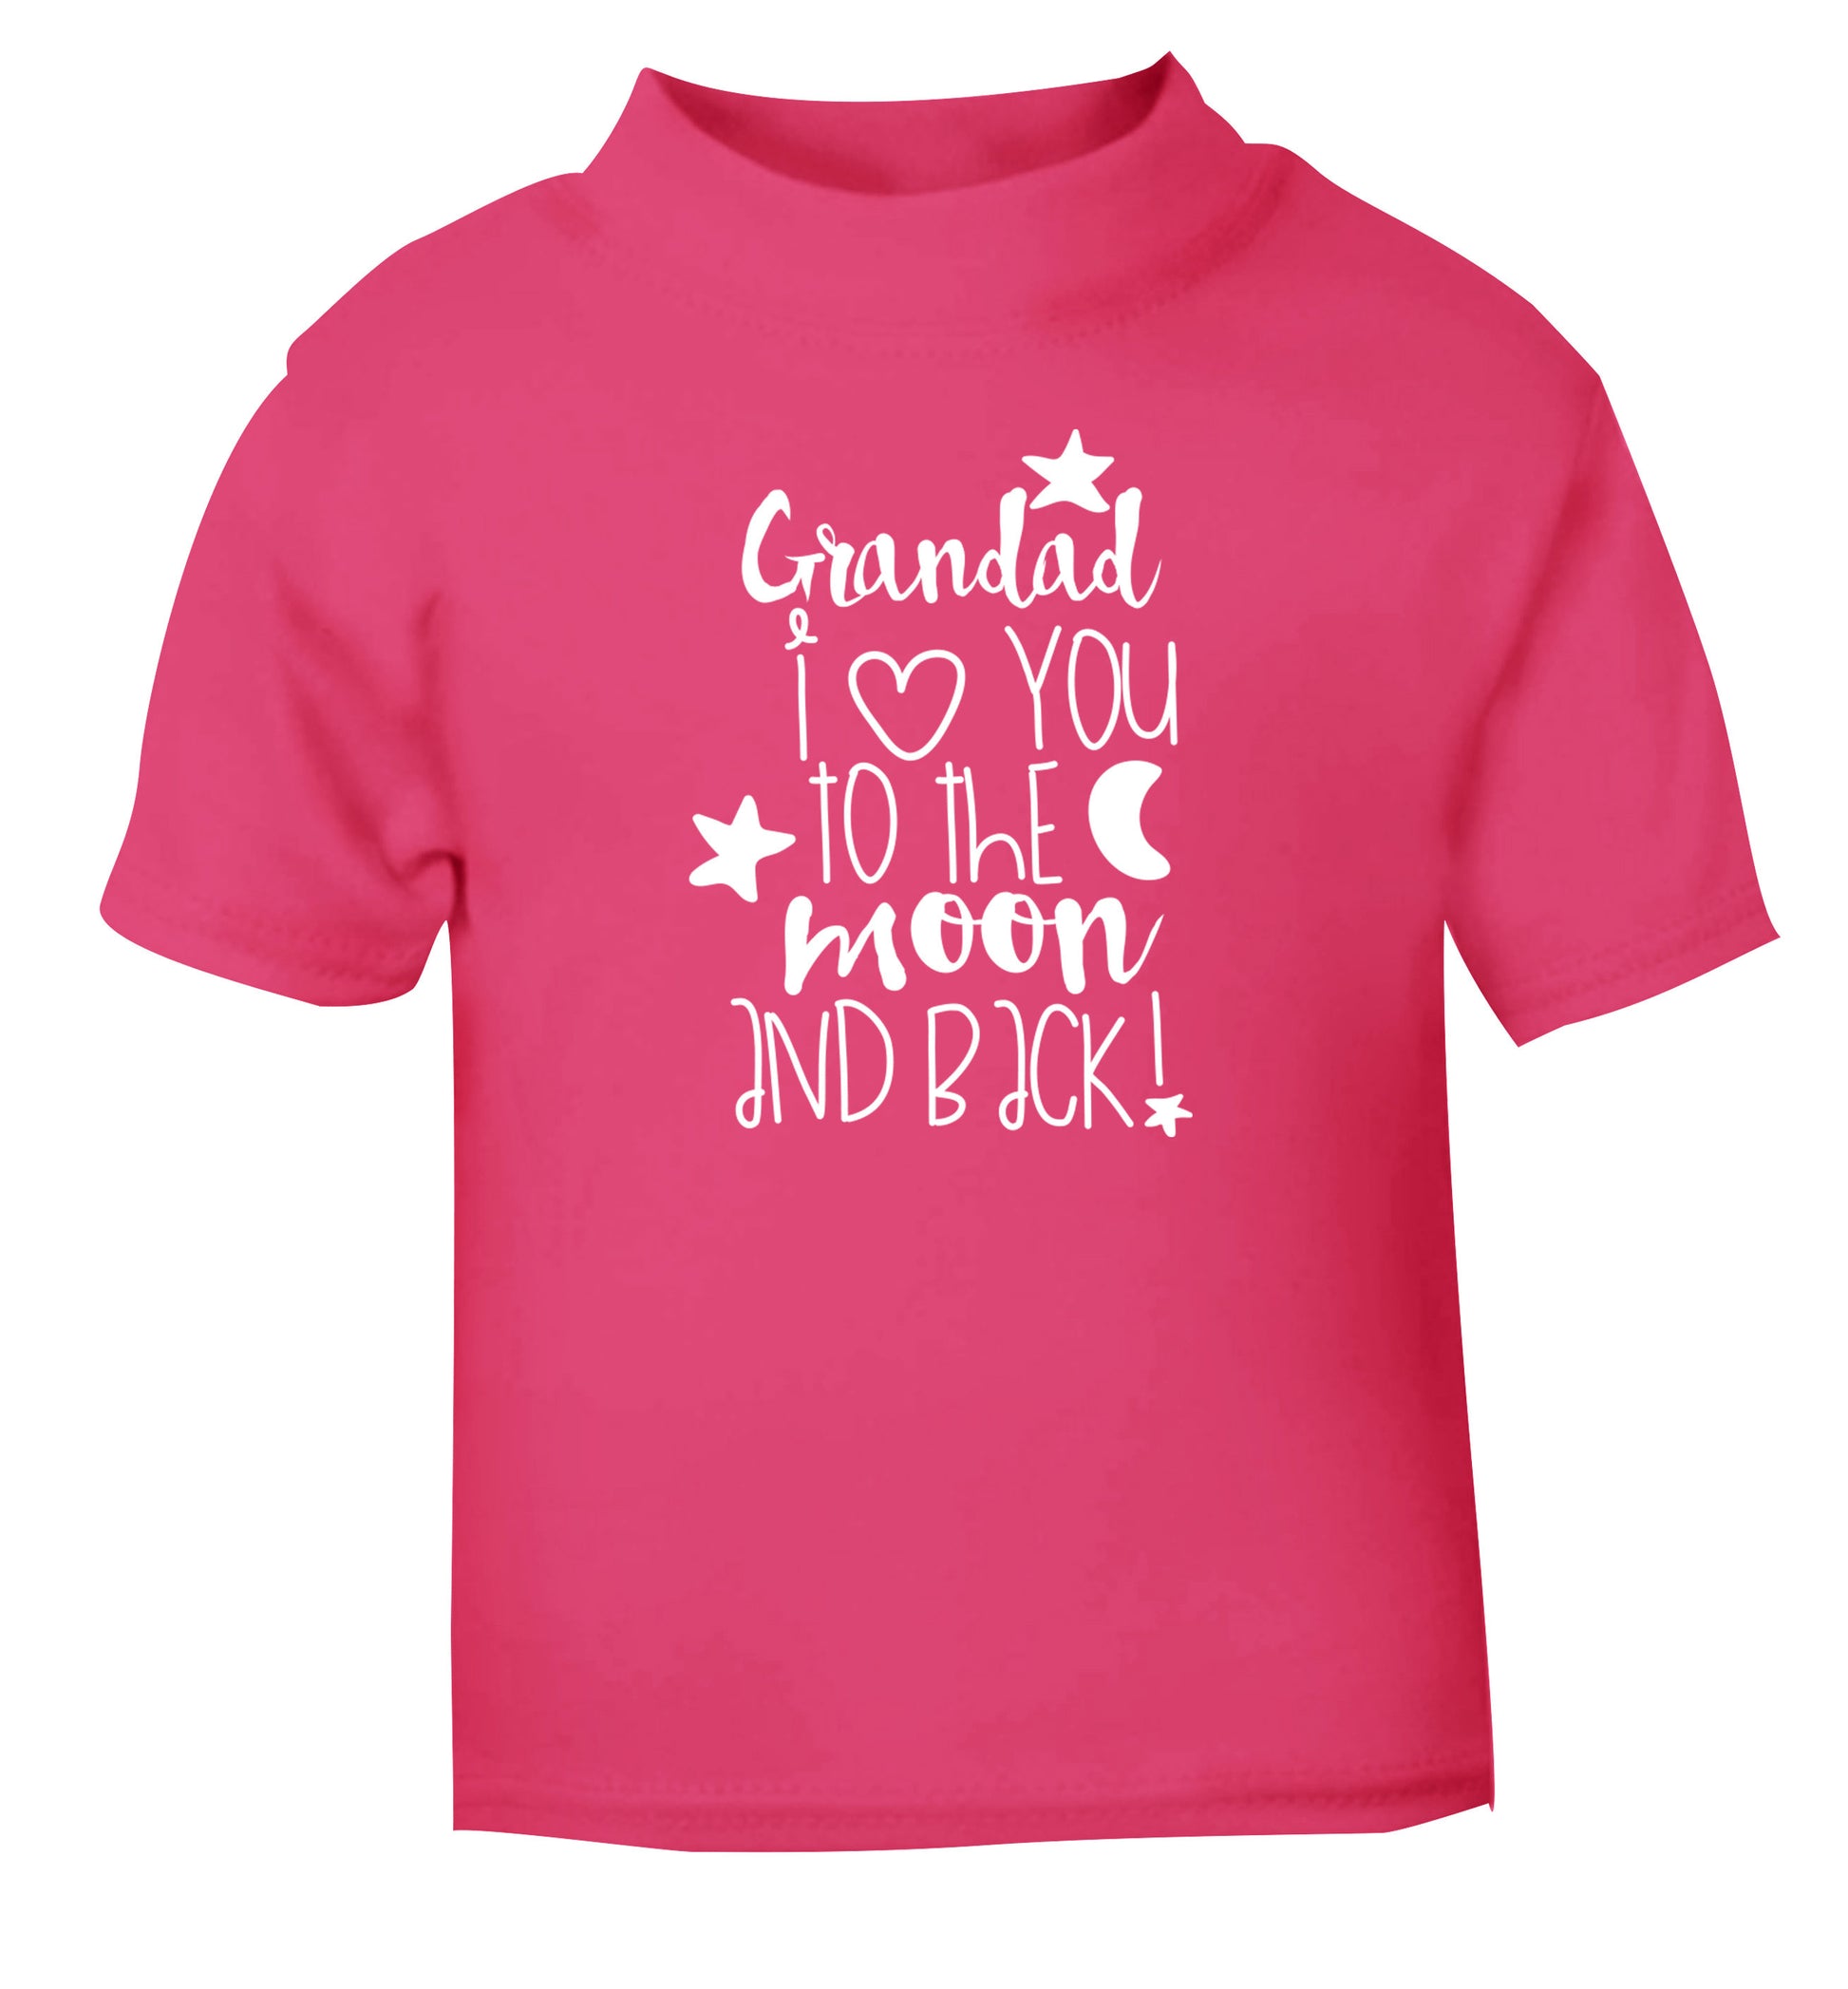 Grandad's I love you to the moon and back pink Baby Toddler Tshirt 2 Years